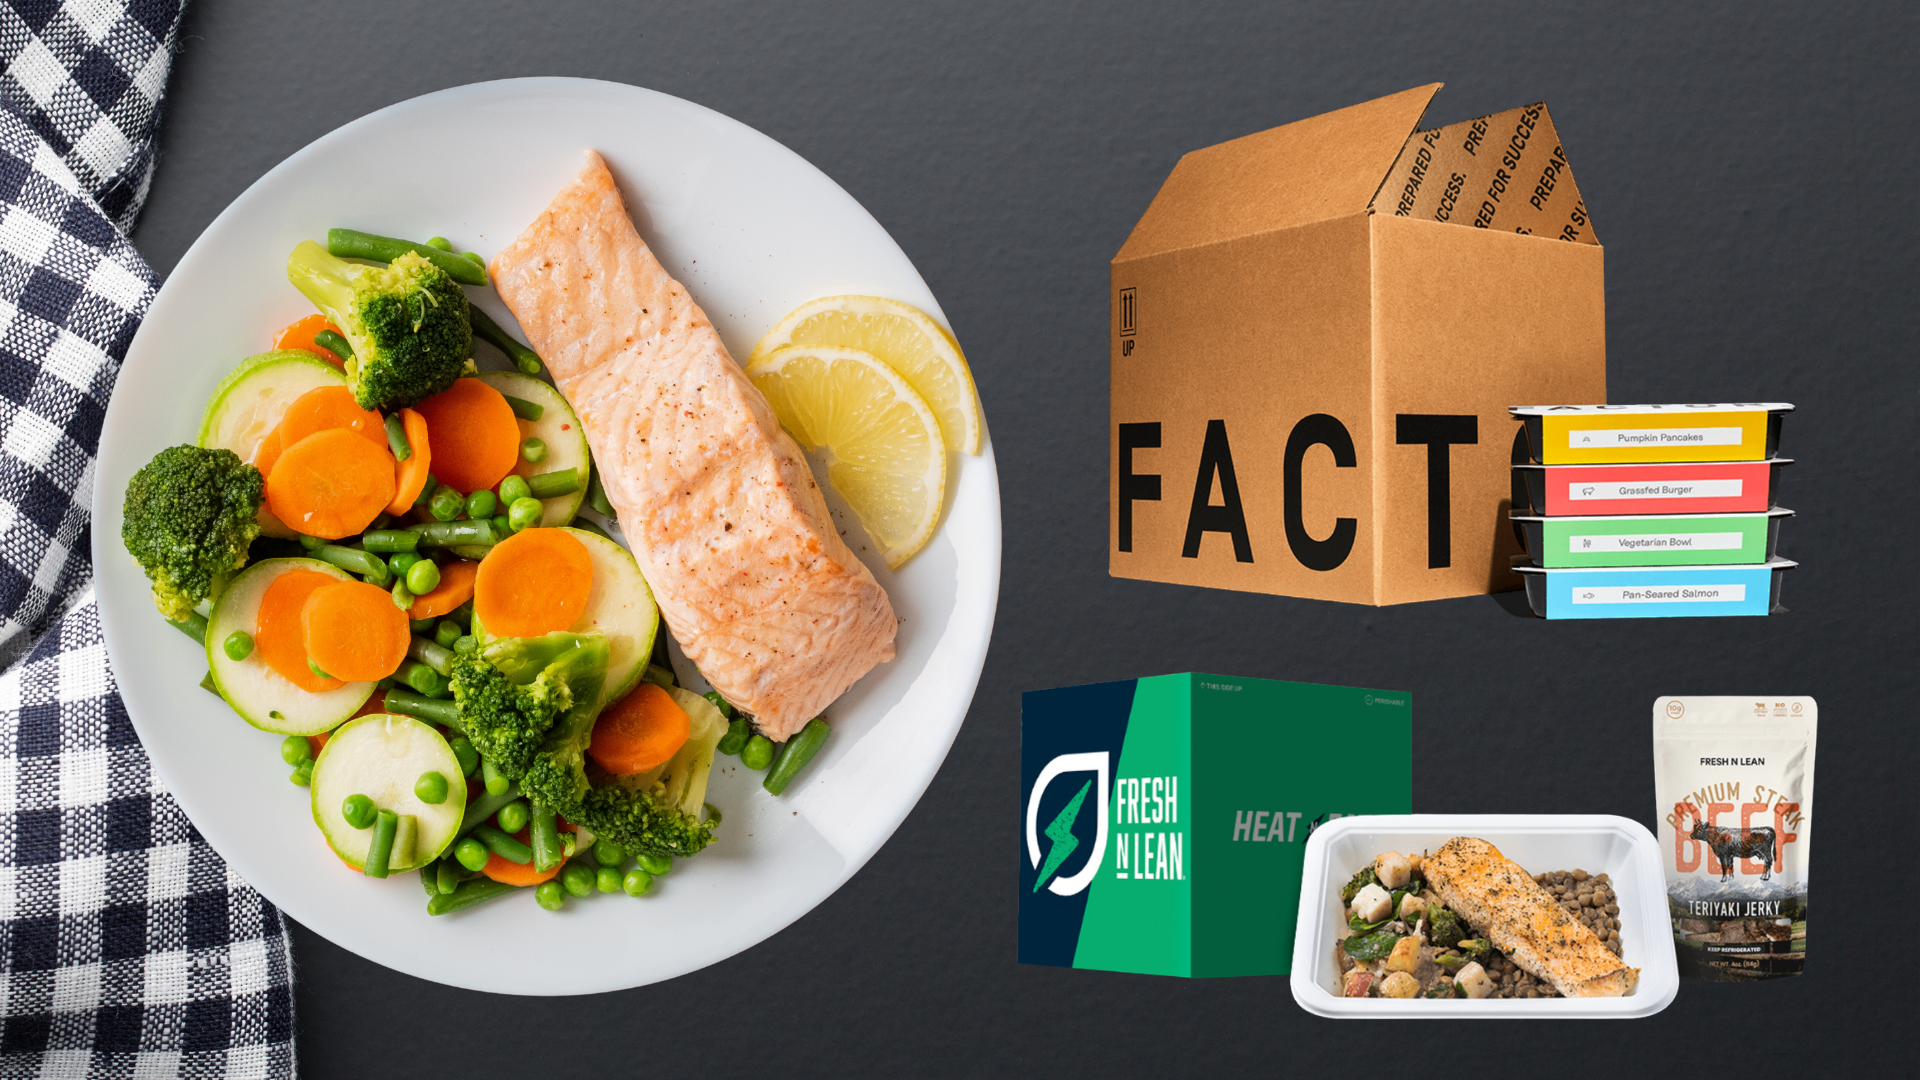 I Tried Factor Meal Delivery for a Week. Here's the Good and the Bad - CNET